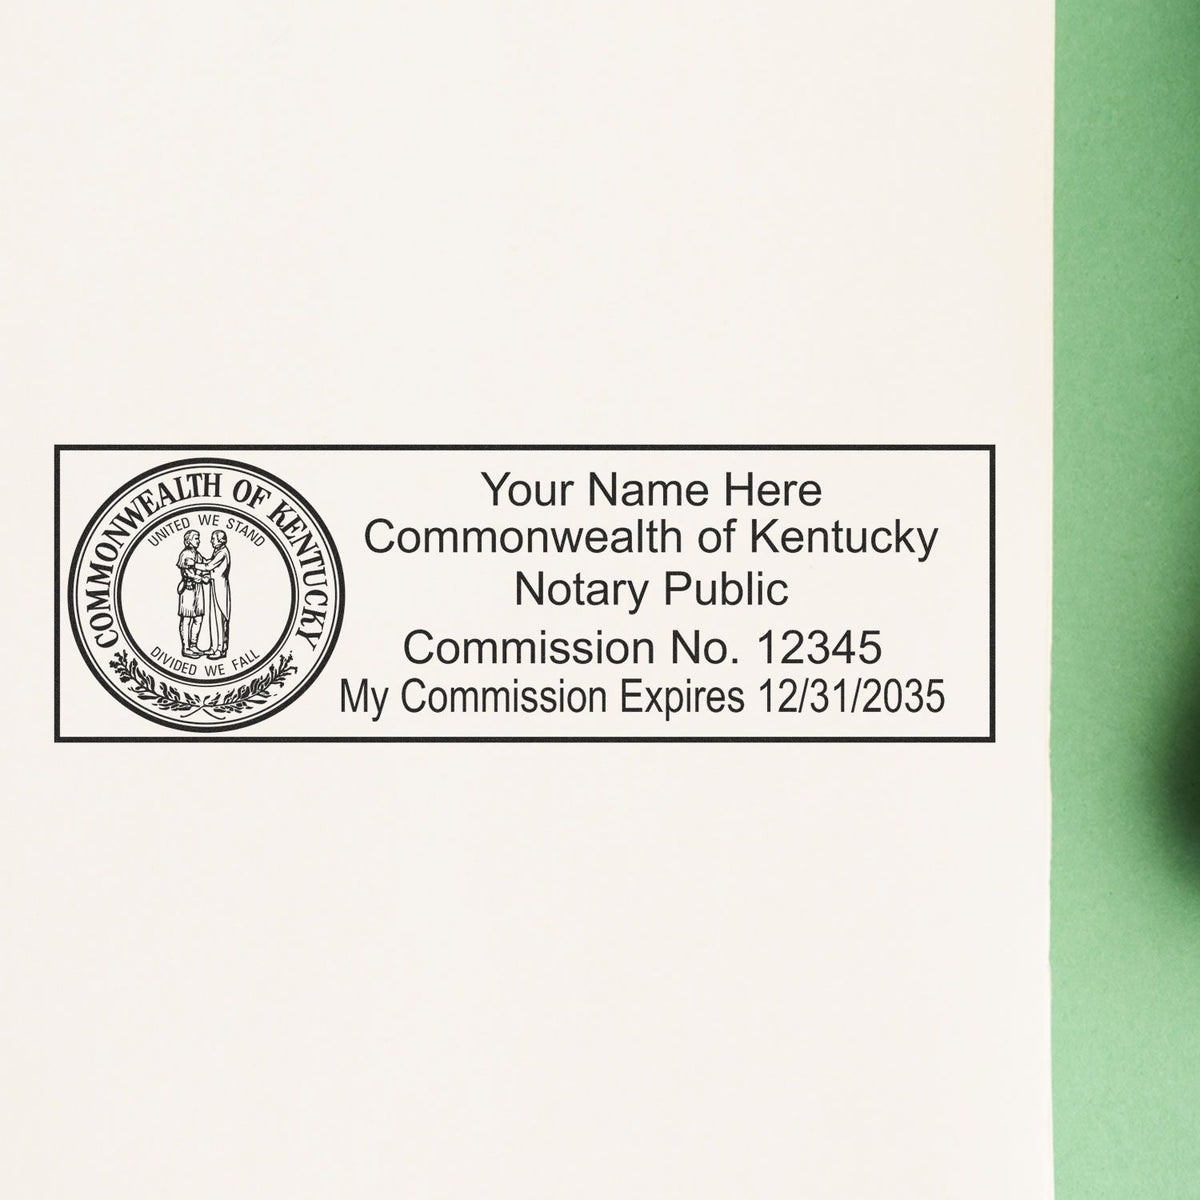 An alternative view of the PSI Kentucky Notary Stamp stamped on a sheet of paper showing the image in use